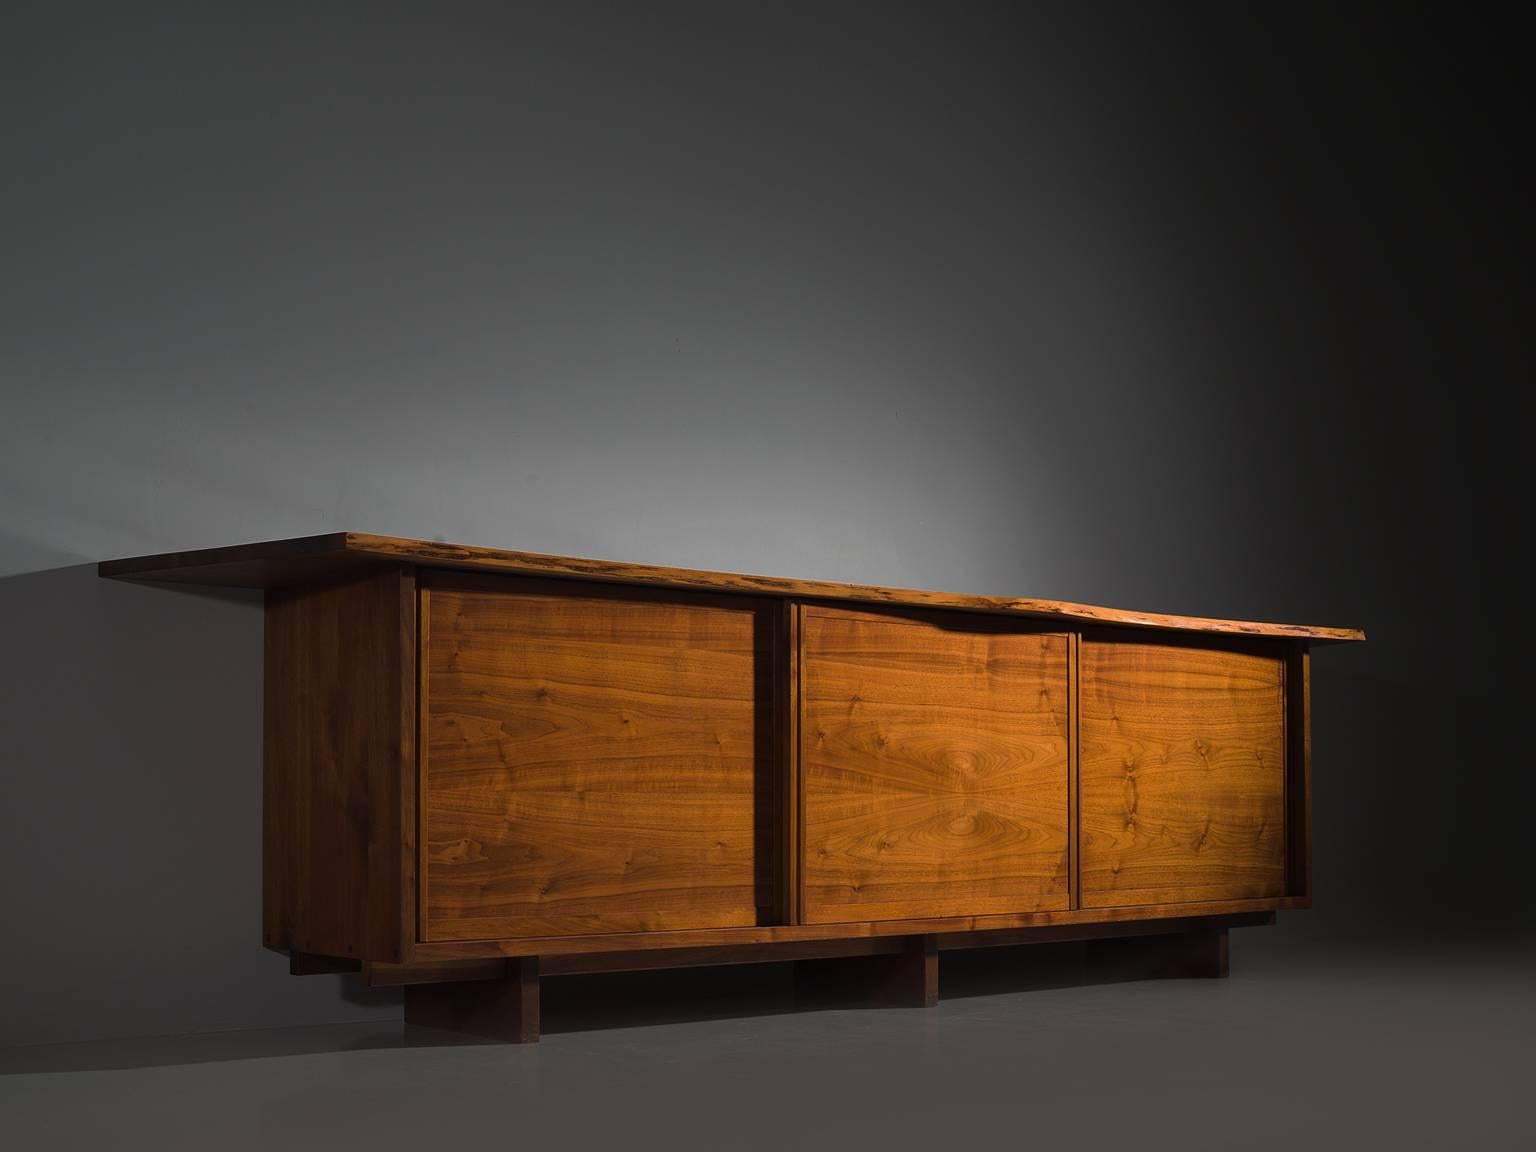 George Nakashima, triple sliding door cabinet, walnut, New Hope, PA, 1960s

This cabinet is part of the Midcentury design collection by Morentz. with three sliding doors and four drawers behind each door, executed in walnut with traditional and